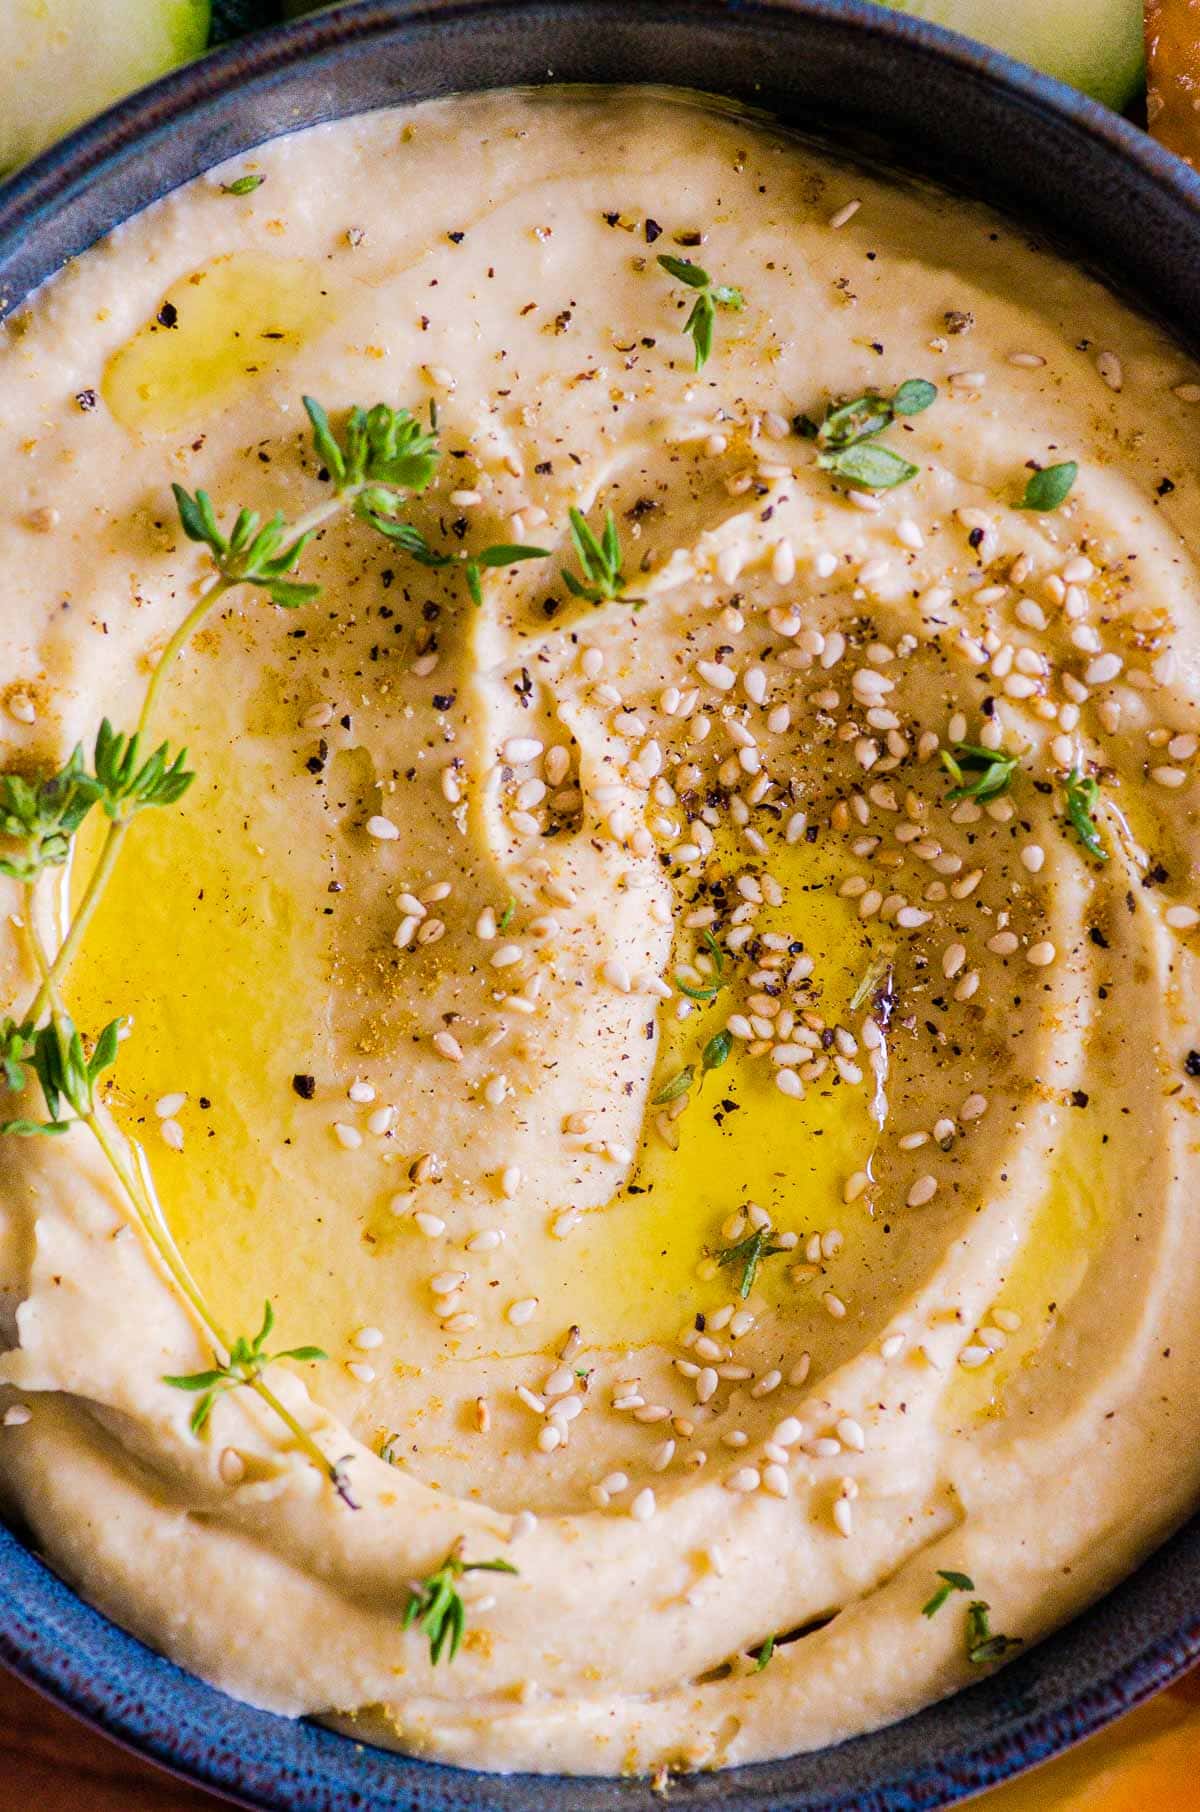 garlic hummus in bowl with olive oil and garnishes